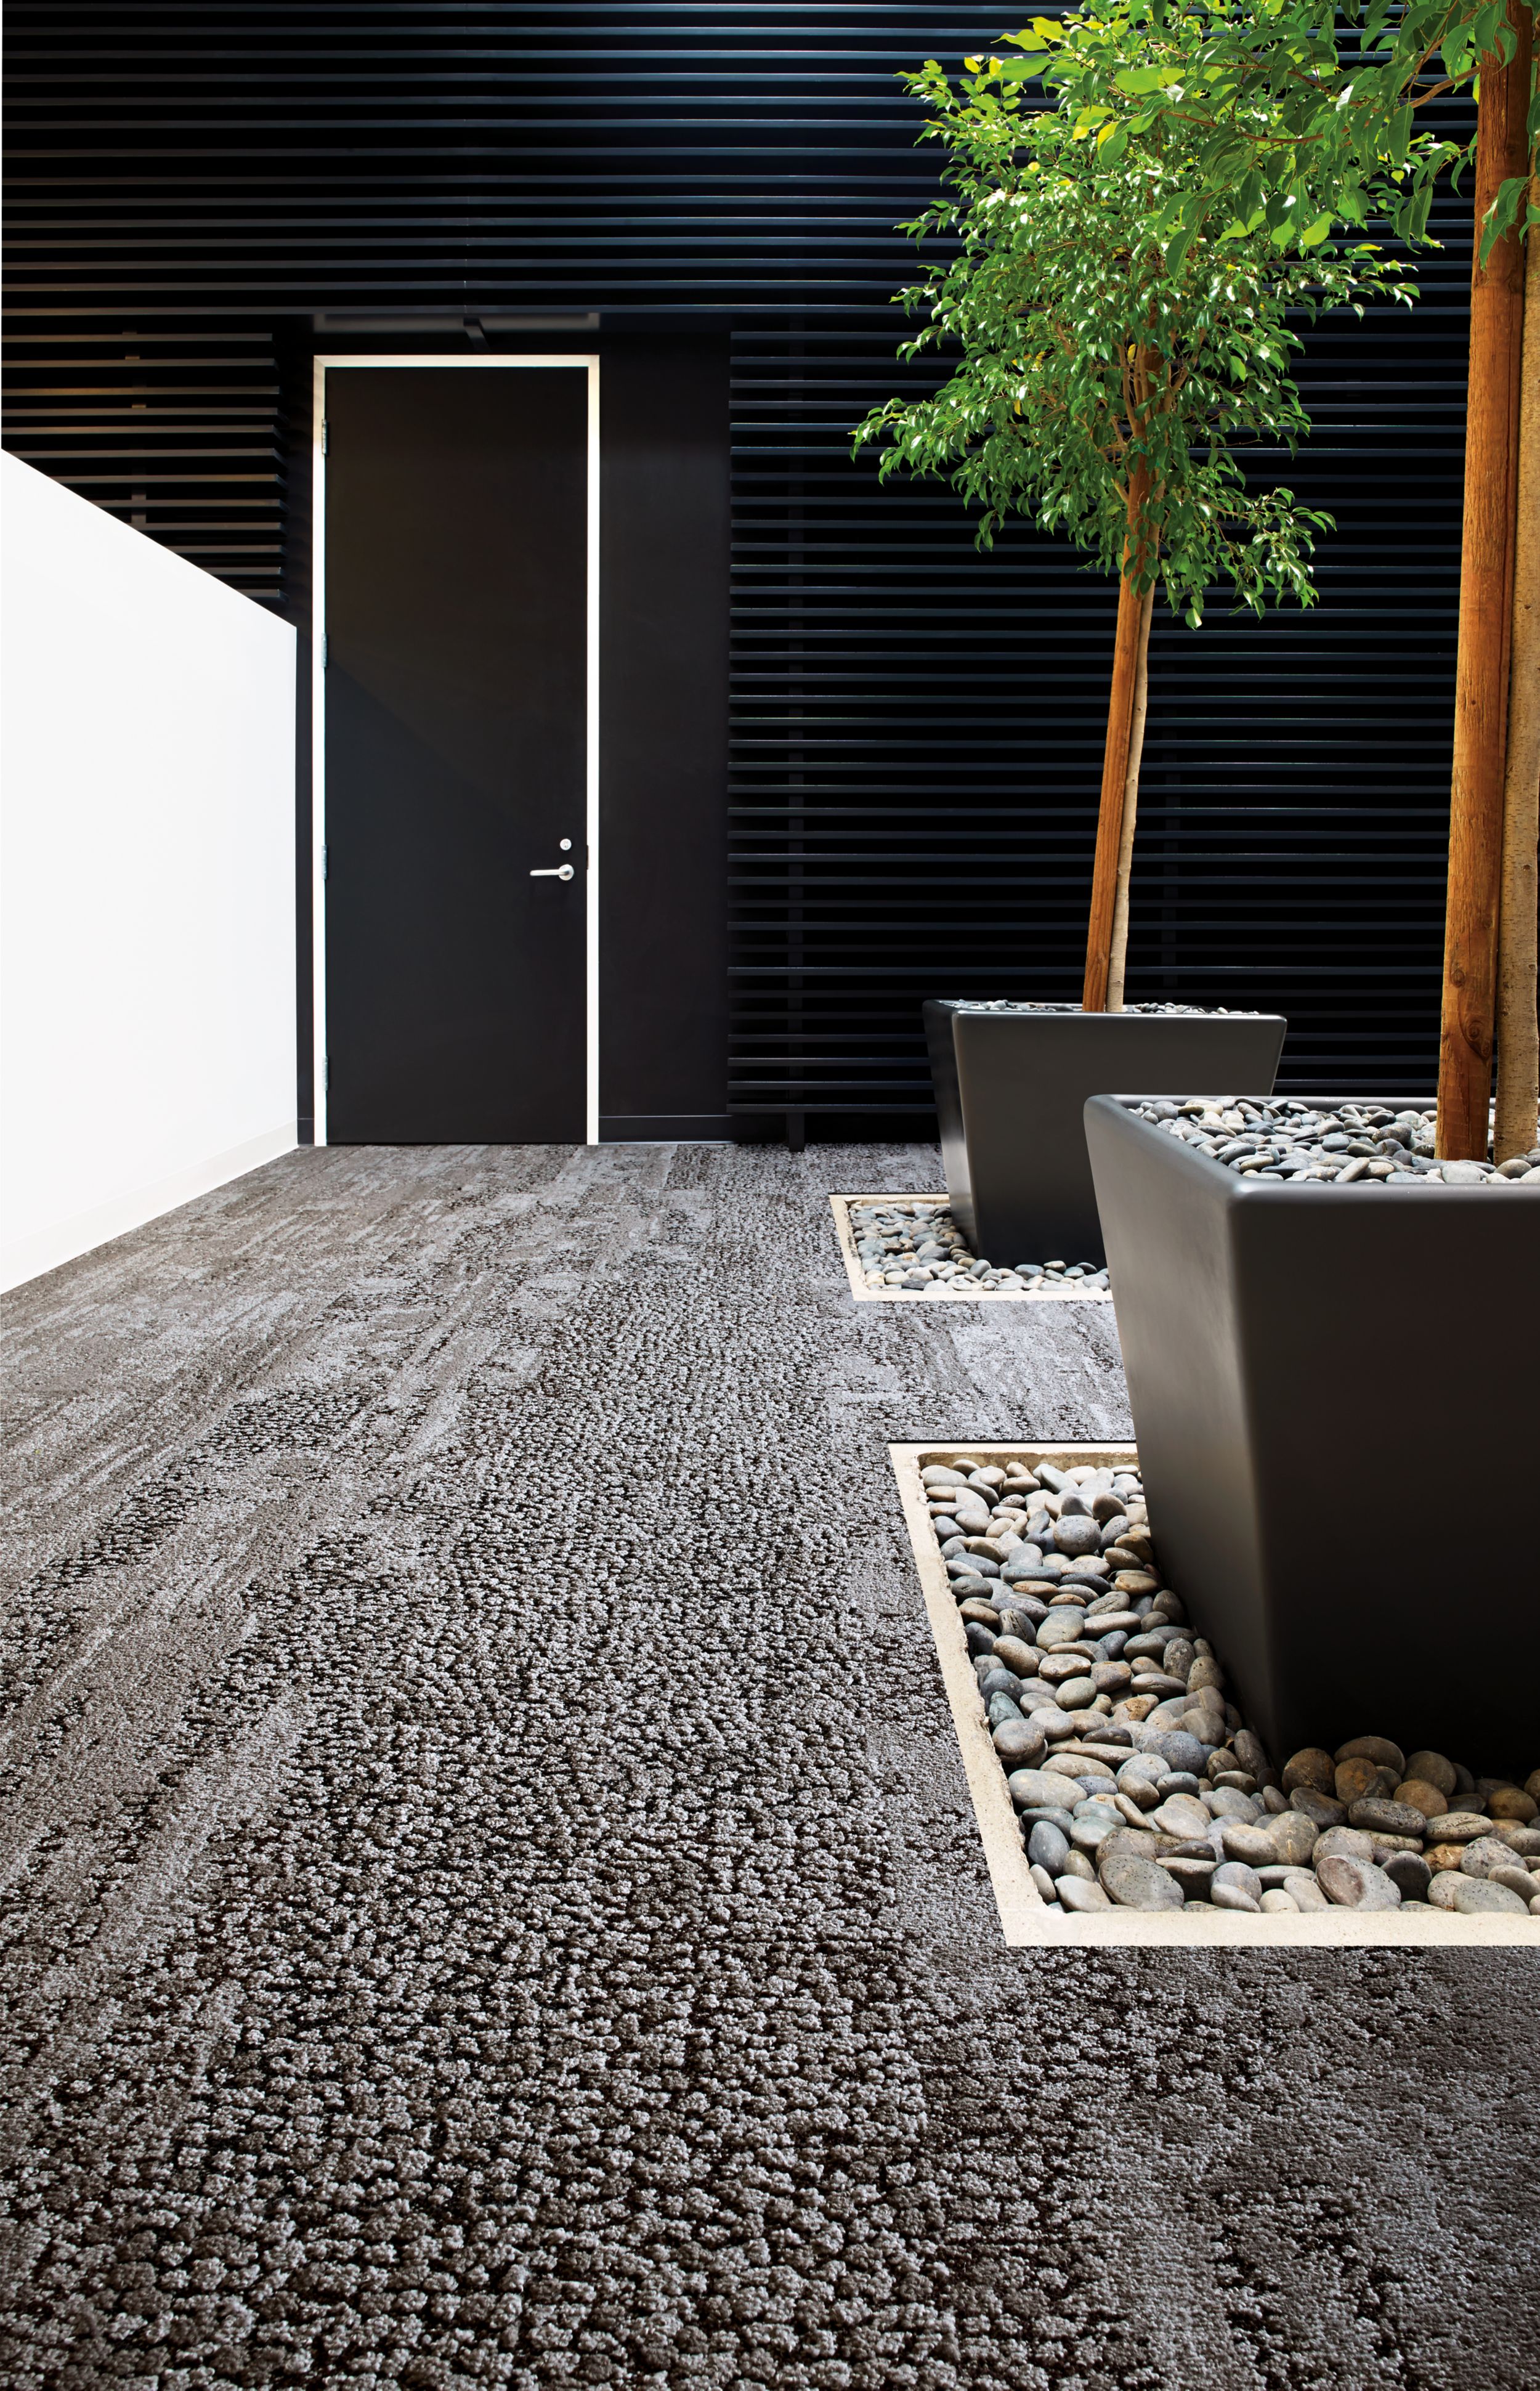 Interface HN810, HN820, HN840 and HN850 plank carpet tiles in white anc black room with potted trees and river rock afbeeldingnummer 9